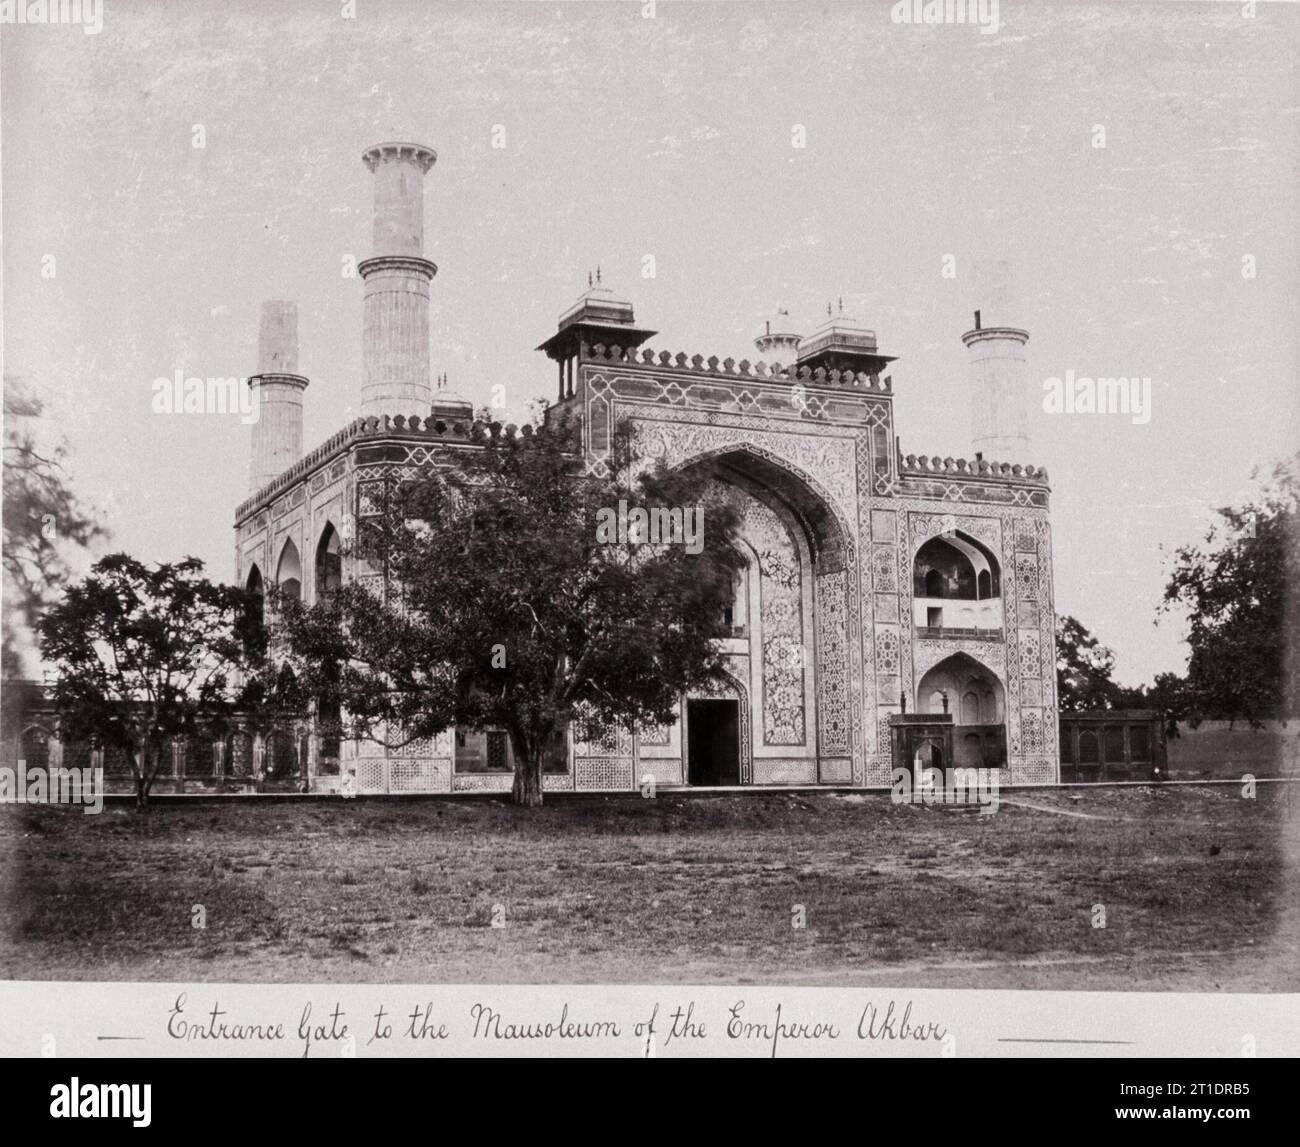 Entrance Gate to the Mausoleum of the Emperor Akbar, Late 1860s. Stock Photo